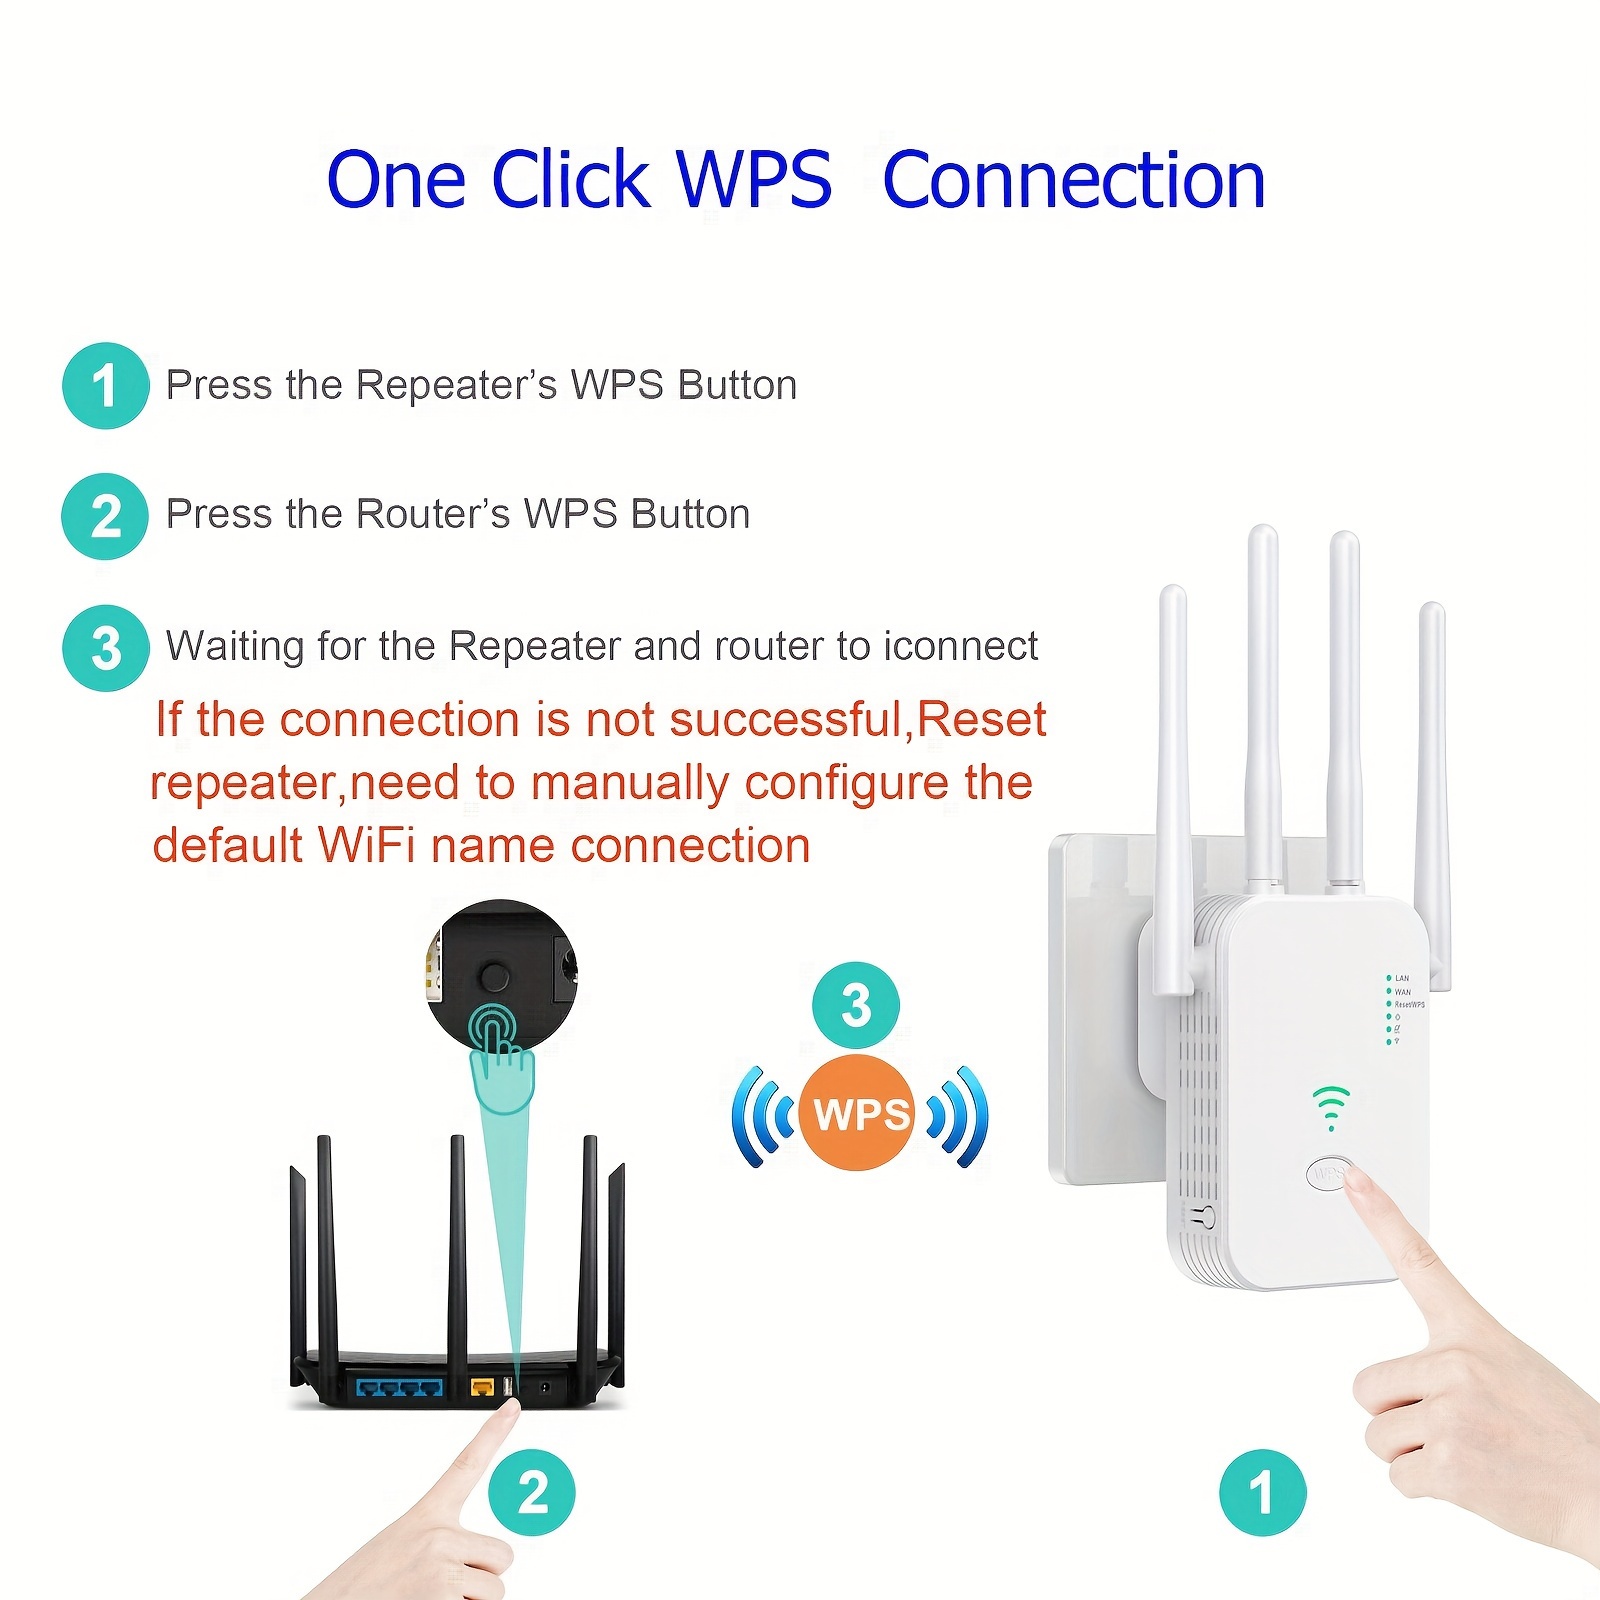 wifi signal amplifier repeater wireless router wi fi signal enhancement extender 2 4g home network signal extender us plug